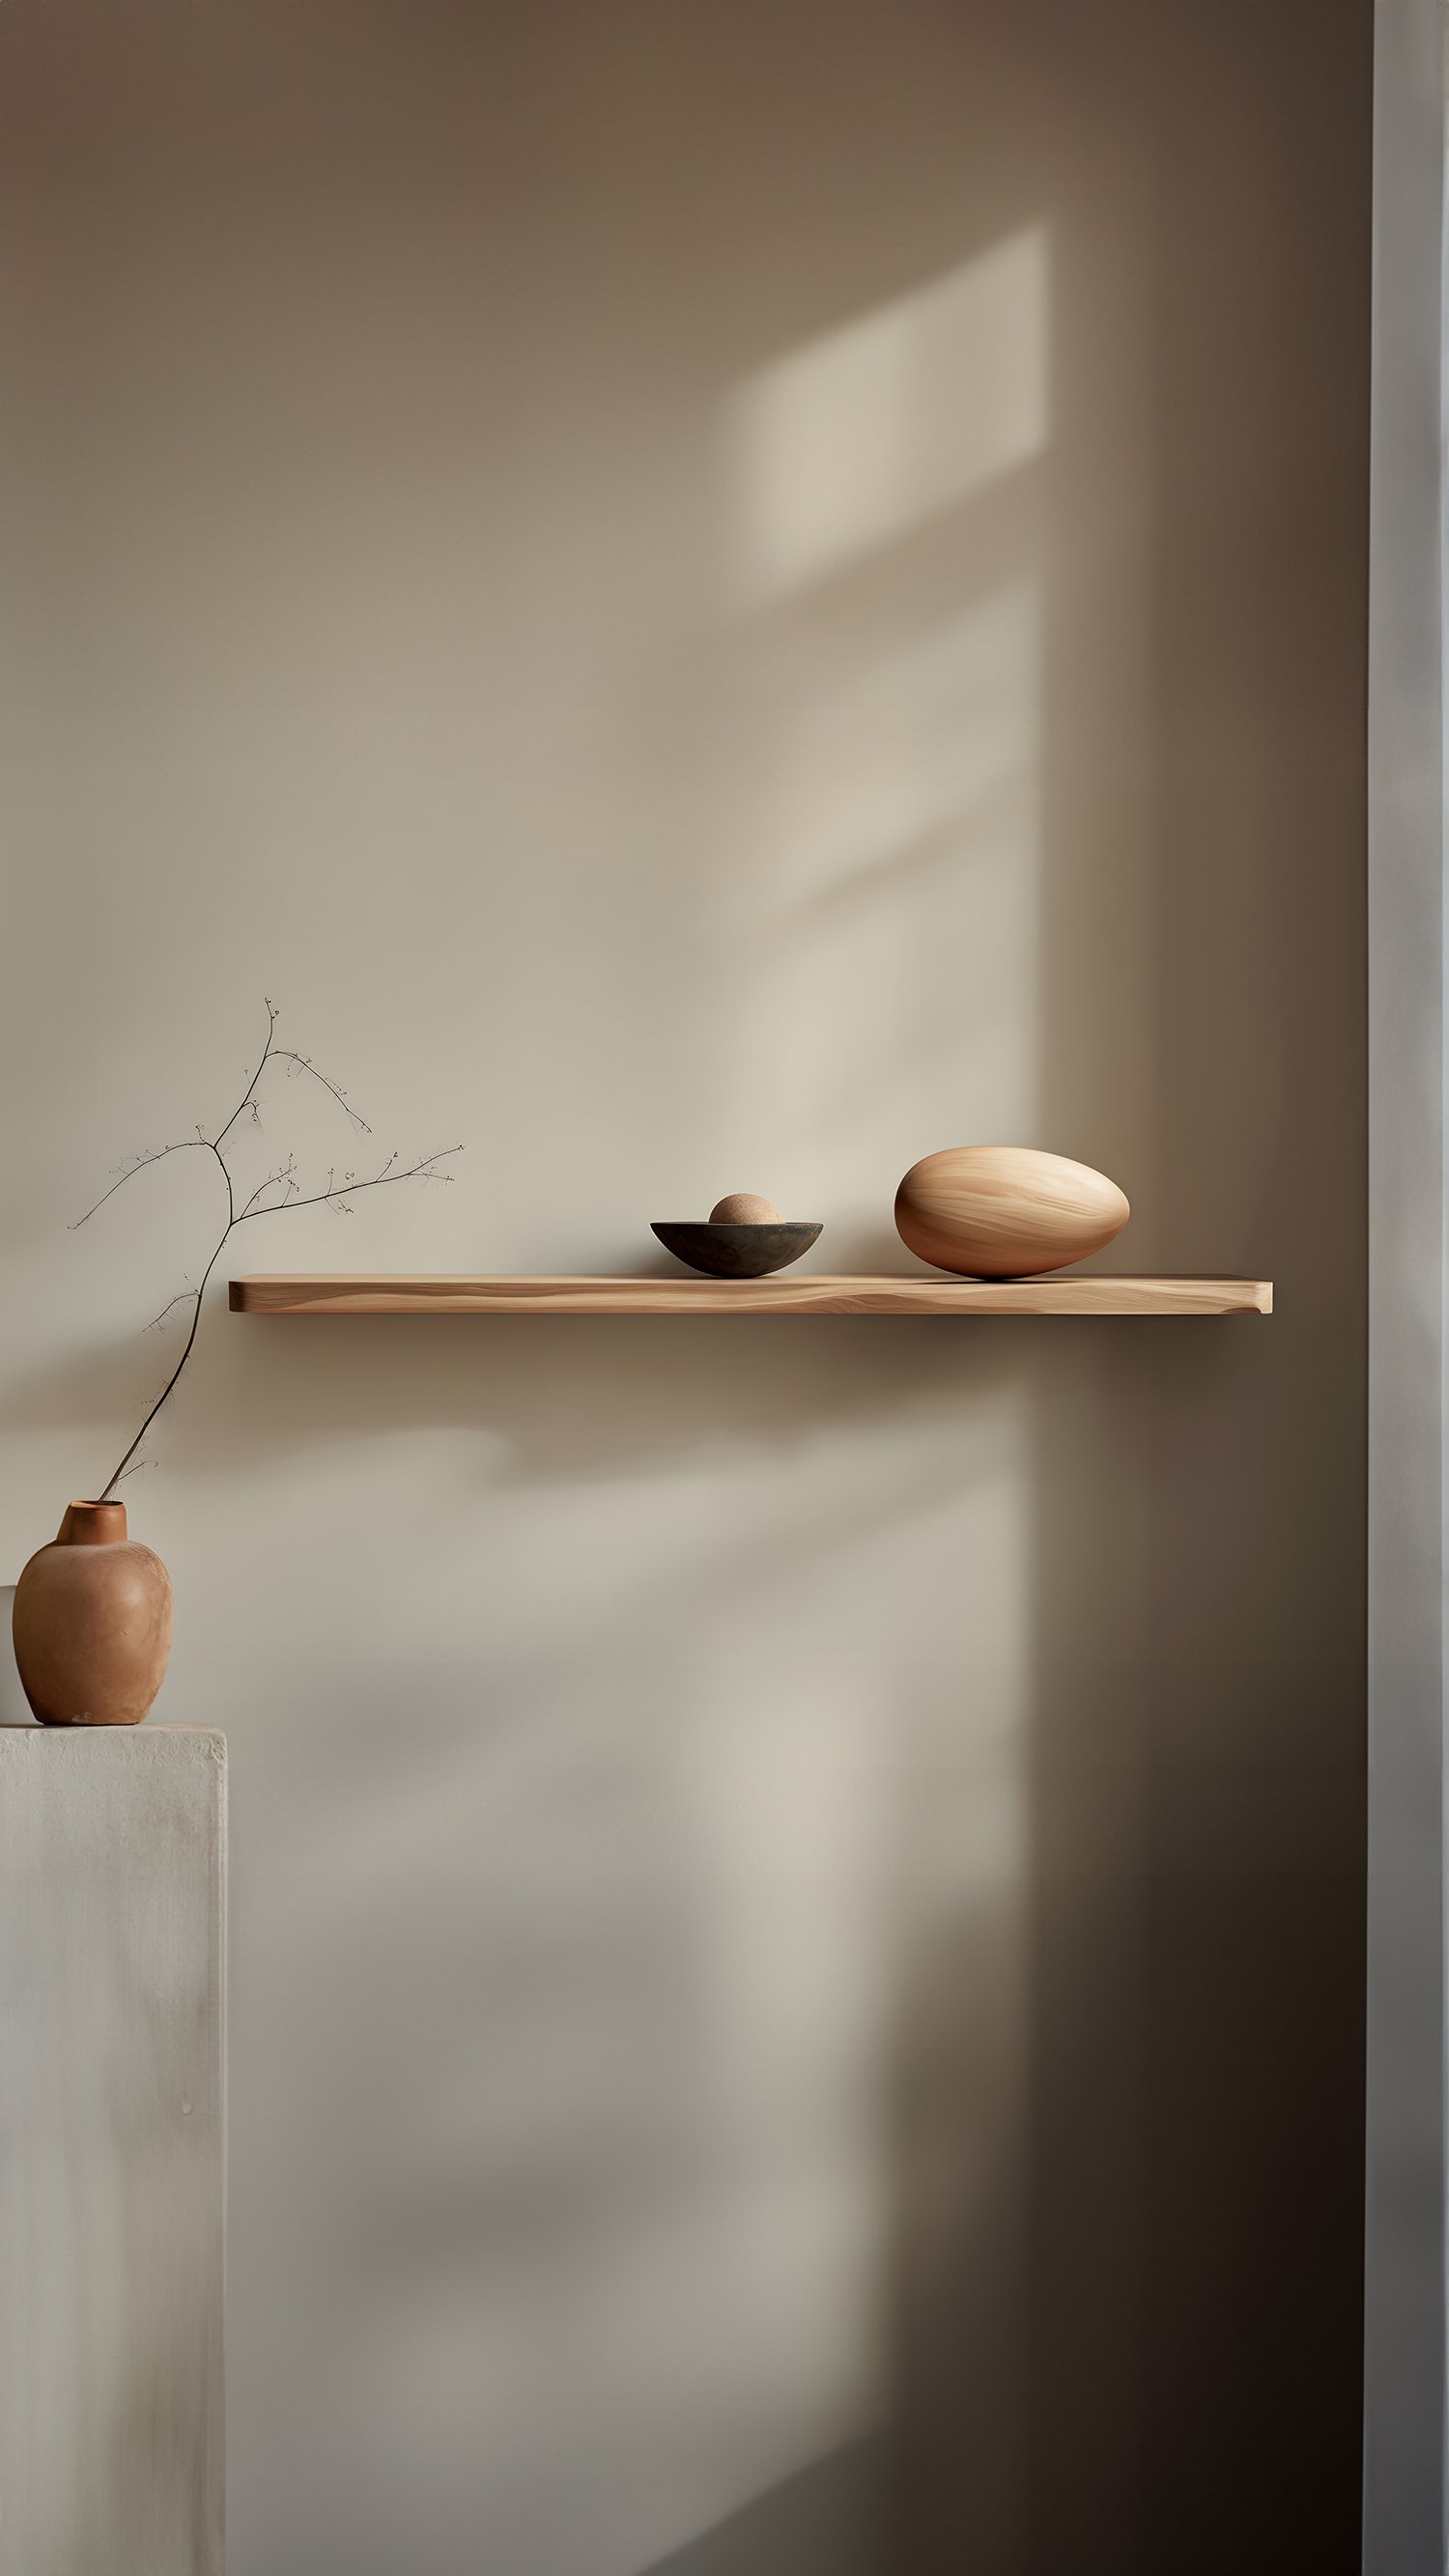 Individual Floating Shelf with One Sculptural Wooden Pebble Accent, Sereno by Joel Escalona — 3.jpg